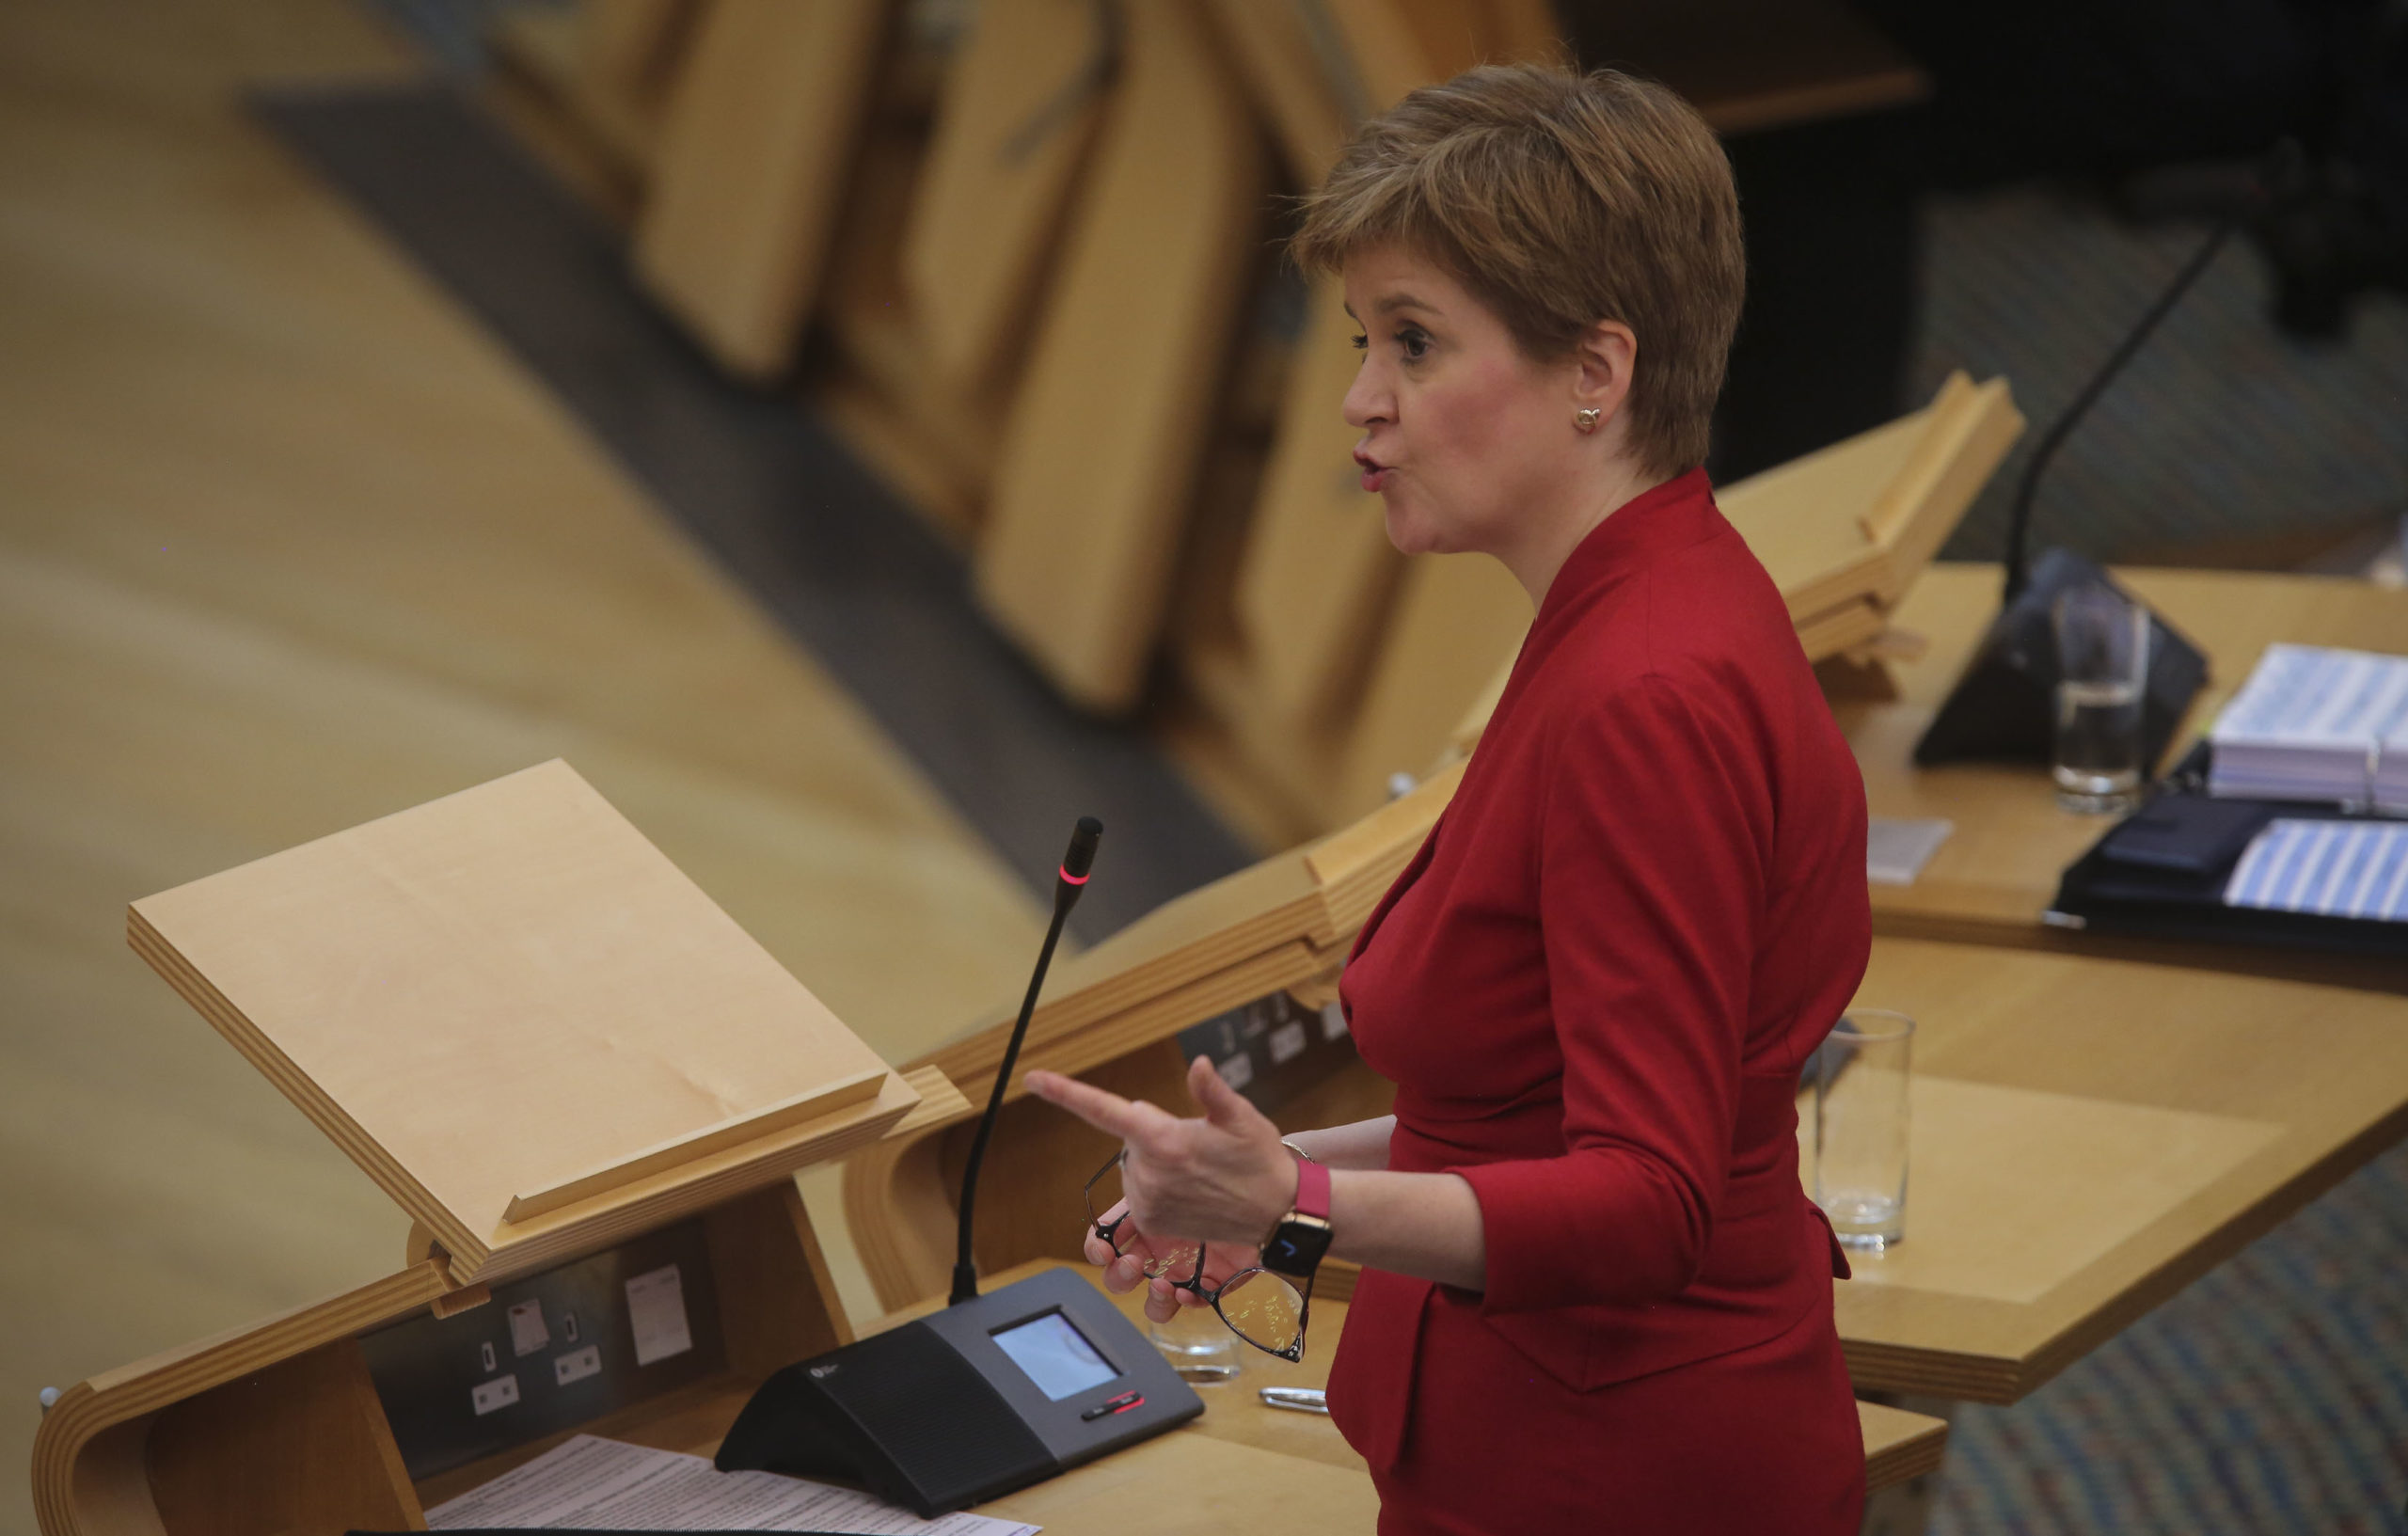 First Minister Nicola Sturgeon responded to concerns over the proposed legislation during FMQs.